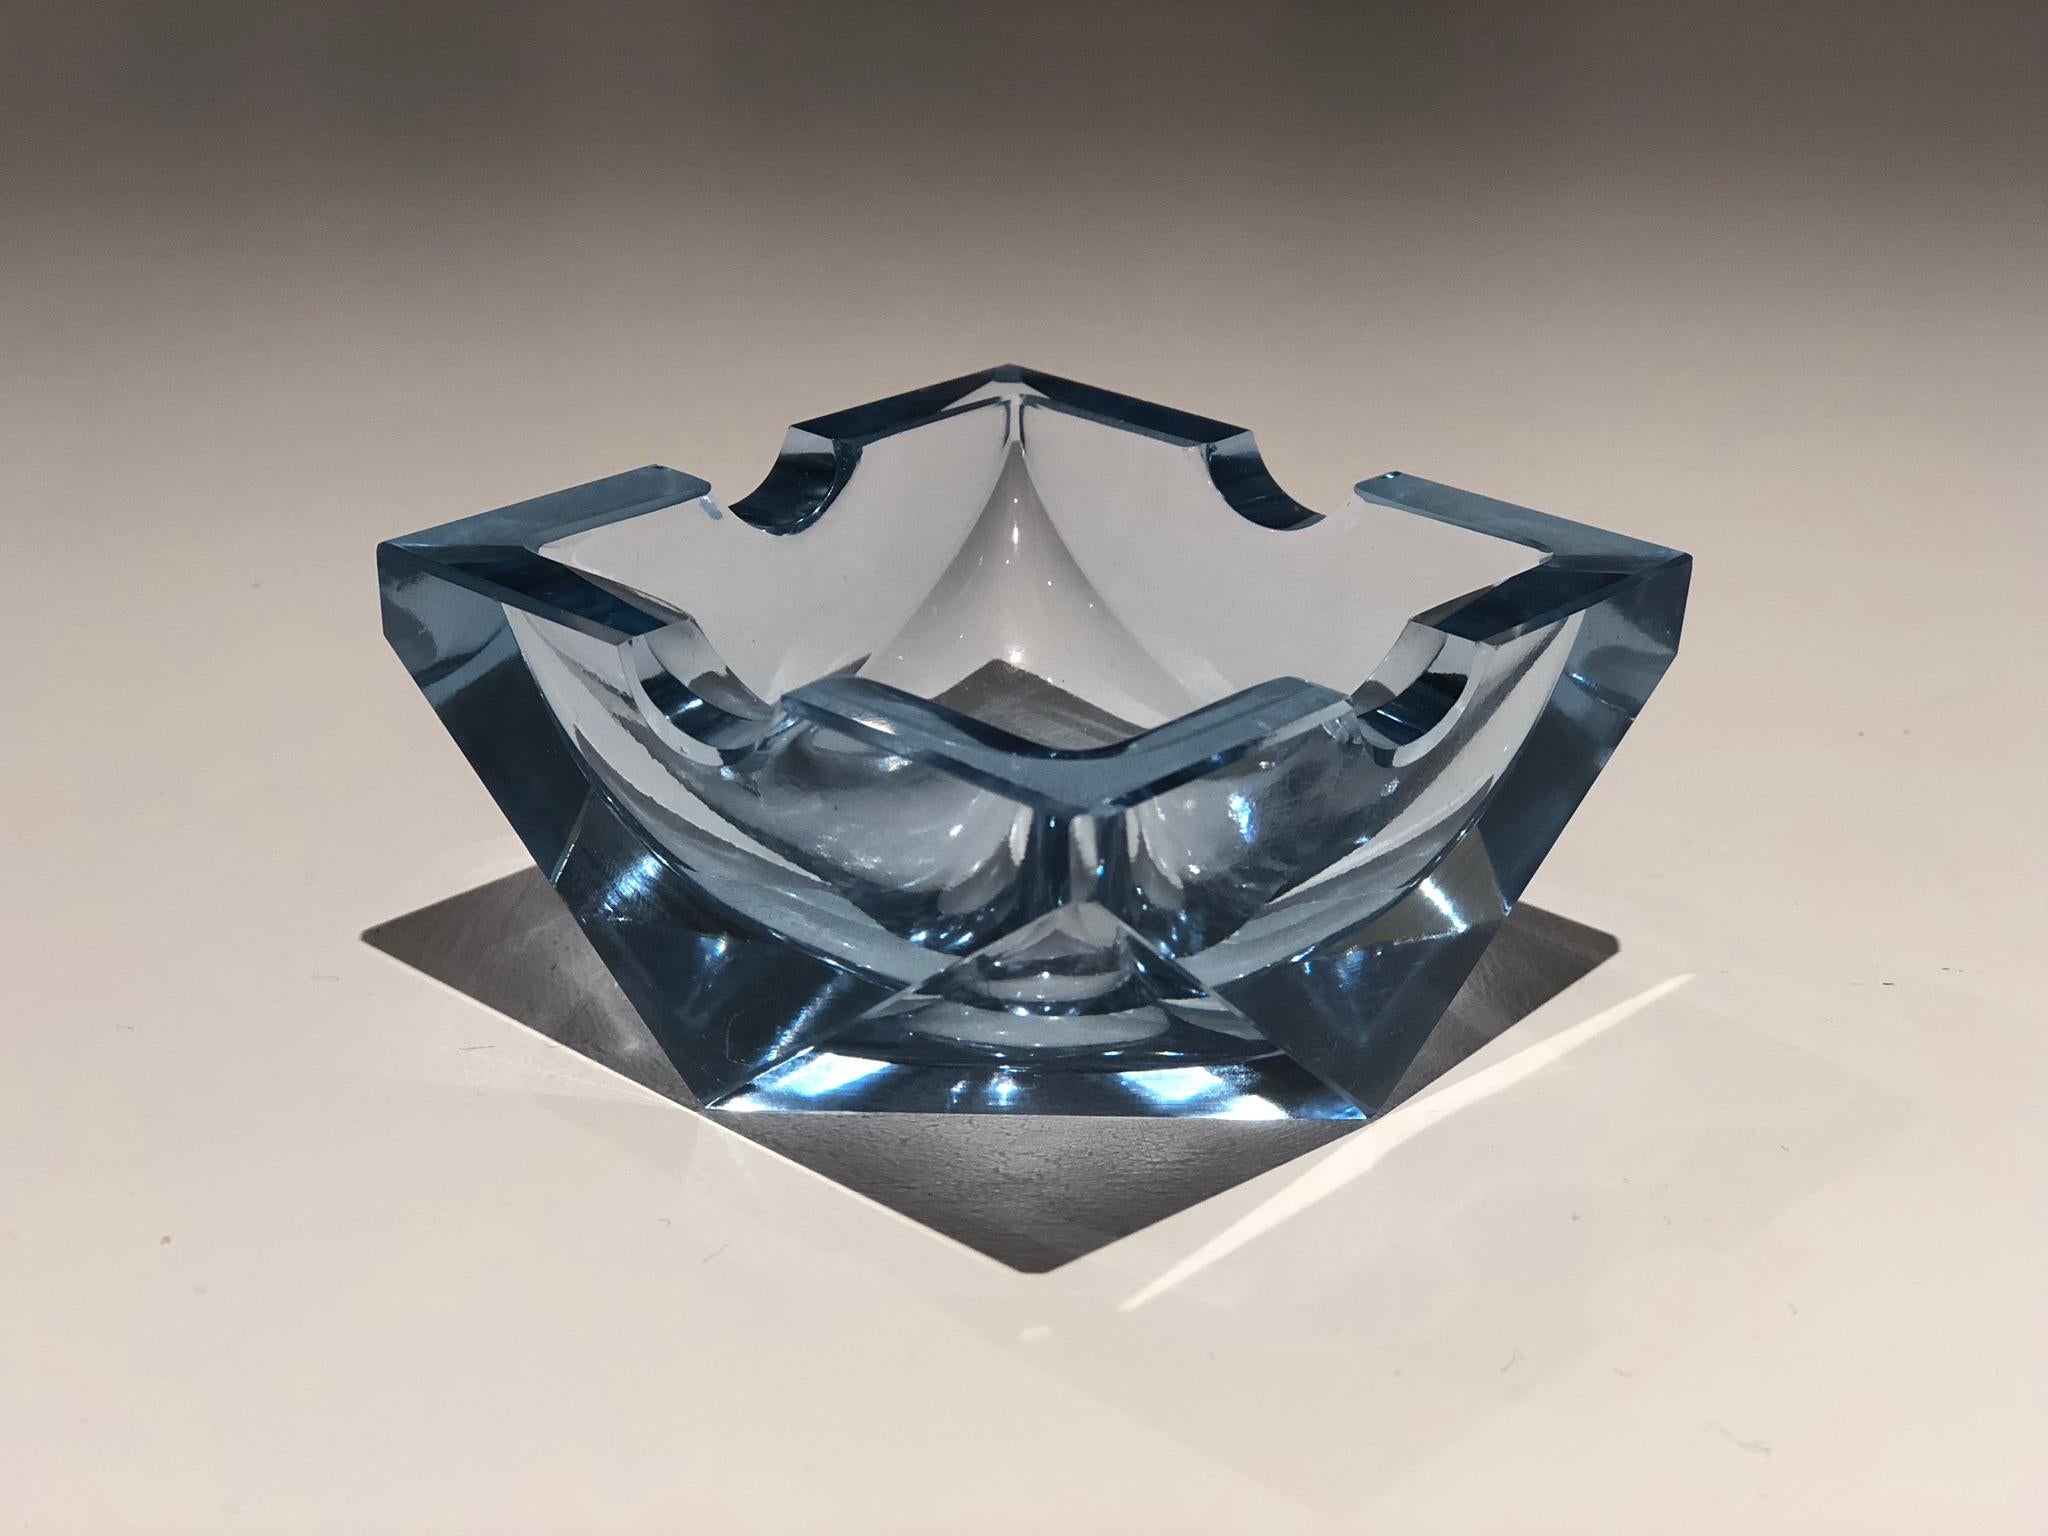 20th century vintage ashtray or decorative piece in beautiful light blue coloured faceted glass typical of 1930-1940 Art Deco period. 
Attributed to Czech glassmaker Heinrich Hoffmann. 

Great condition considering age. 

We are an exhibition space